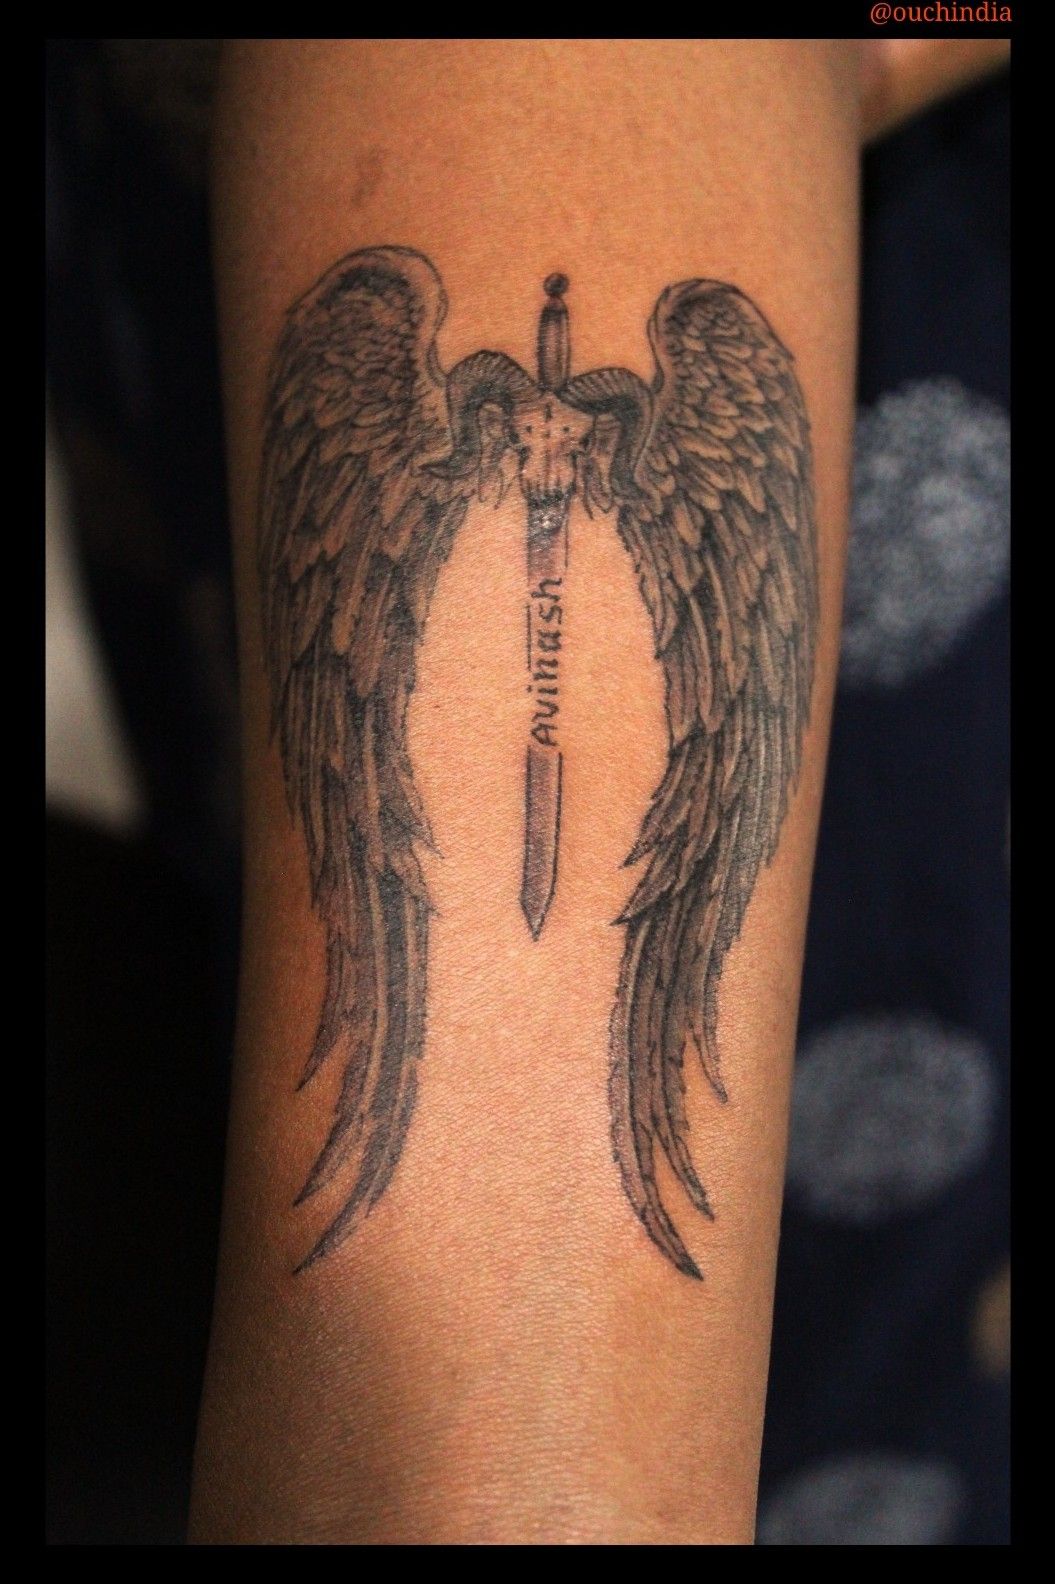 INK Tattoo Studio  The swordandwing design is also very popular and can  be used to symbolize the ability to rise above danger or protection from  your guardian angel tattoo inktattootattooshoptattoostudiotattoostufftattooartbodyartswordwings  